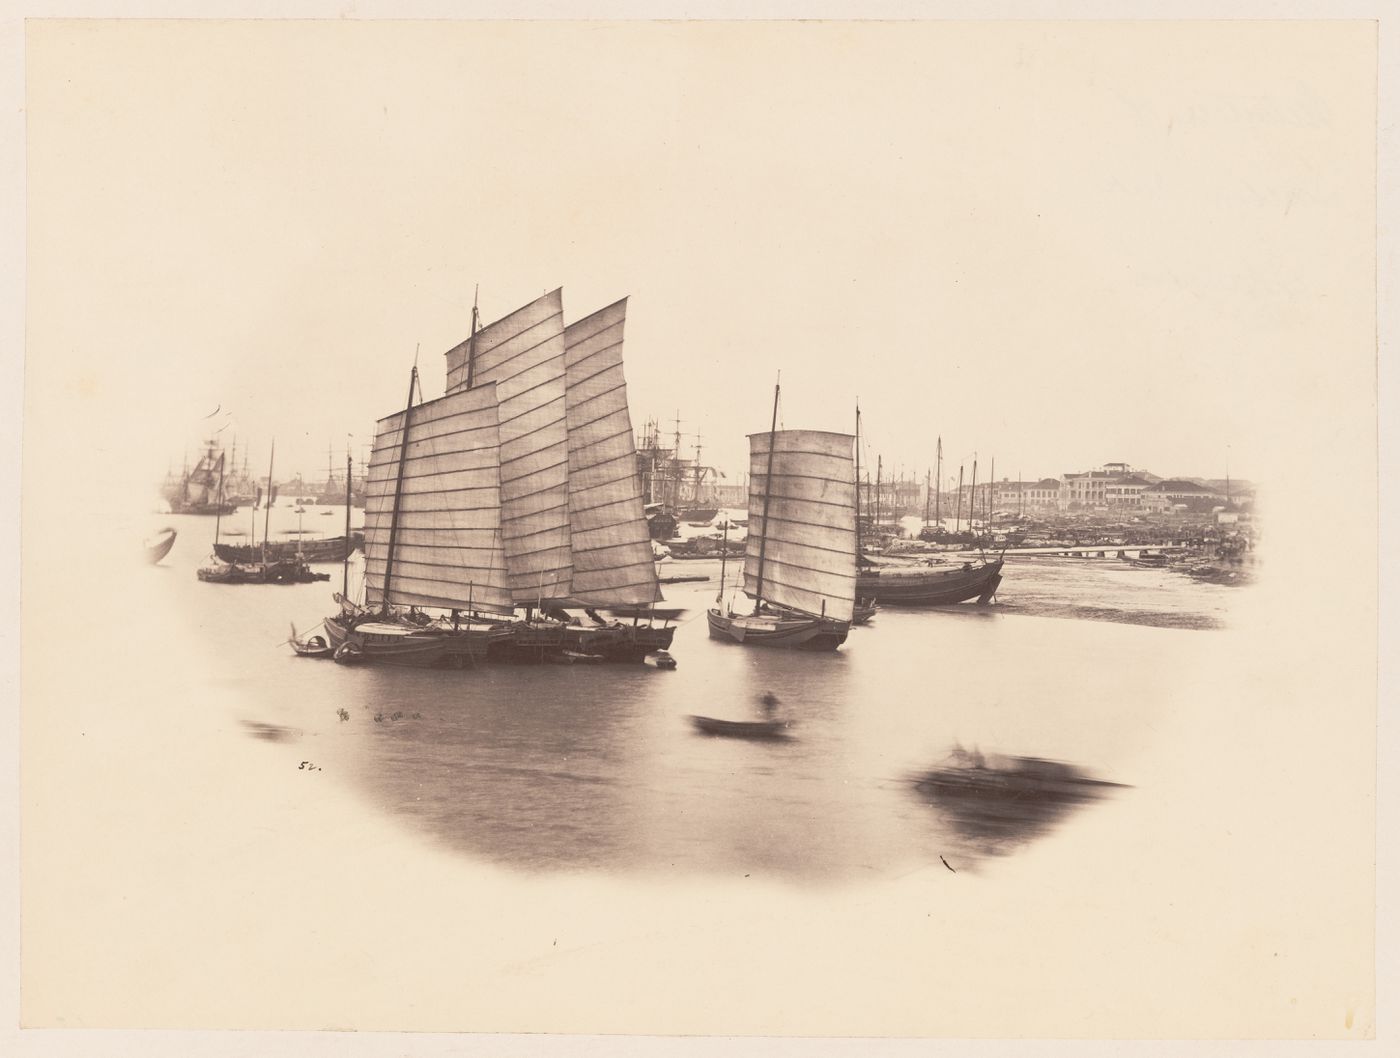 Vignette of junks and other sailing ships on the Wusong Jiang (also known as Suzhou River) showing buildings in the background, Shanghai, China